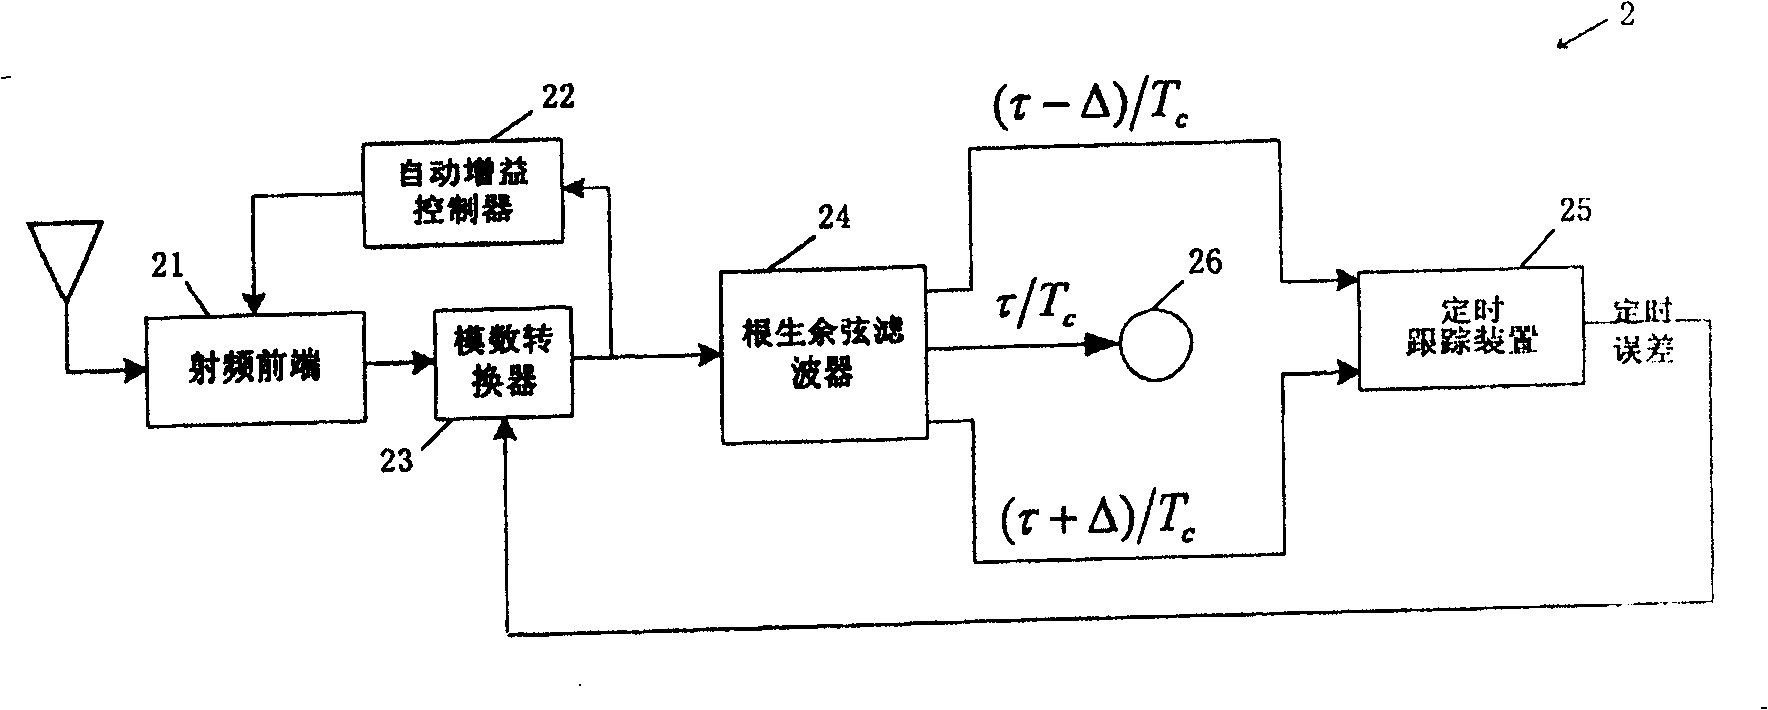 Timing tracking apparatus, receiver, timing tracking and regulating method